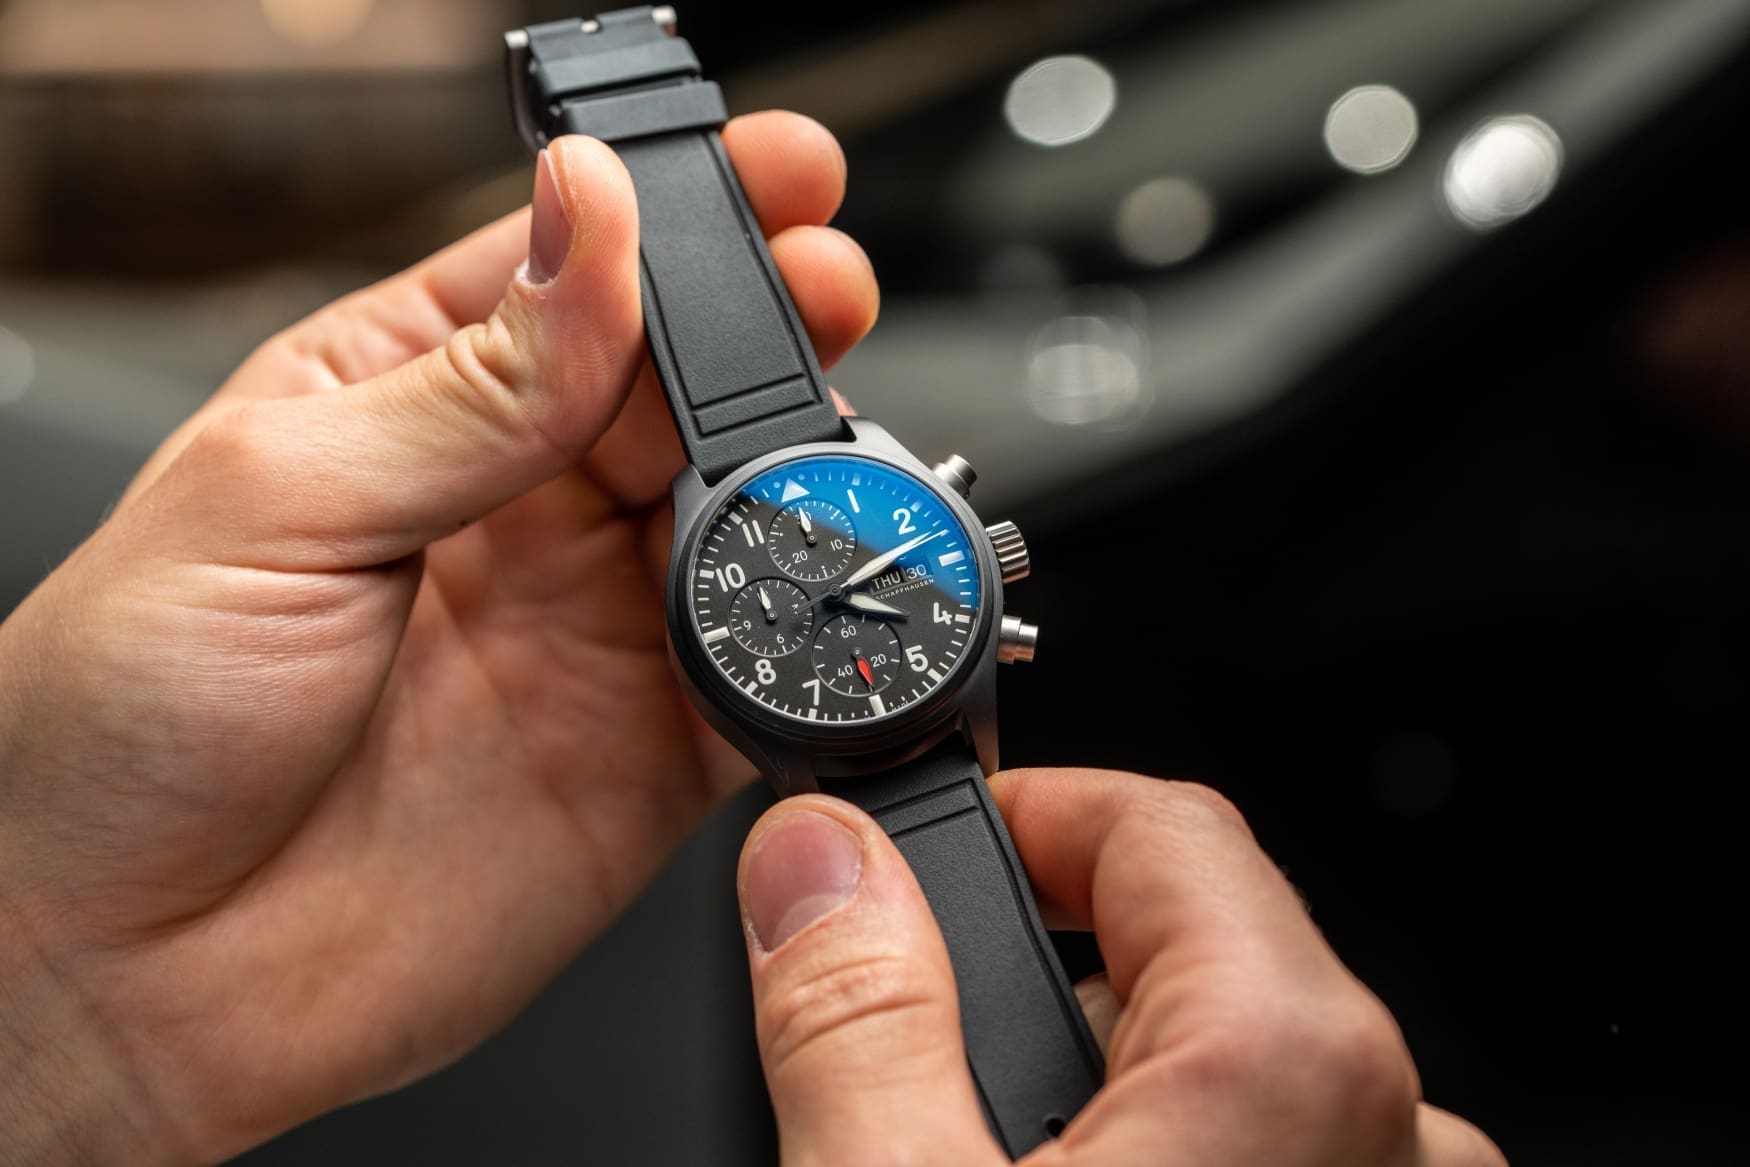 IWC is stealthy in ceramic for the Pilot’s Watch Chronograph Top Gun